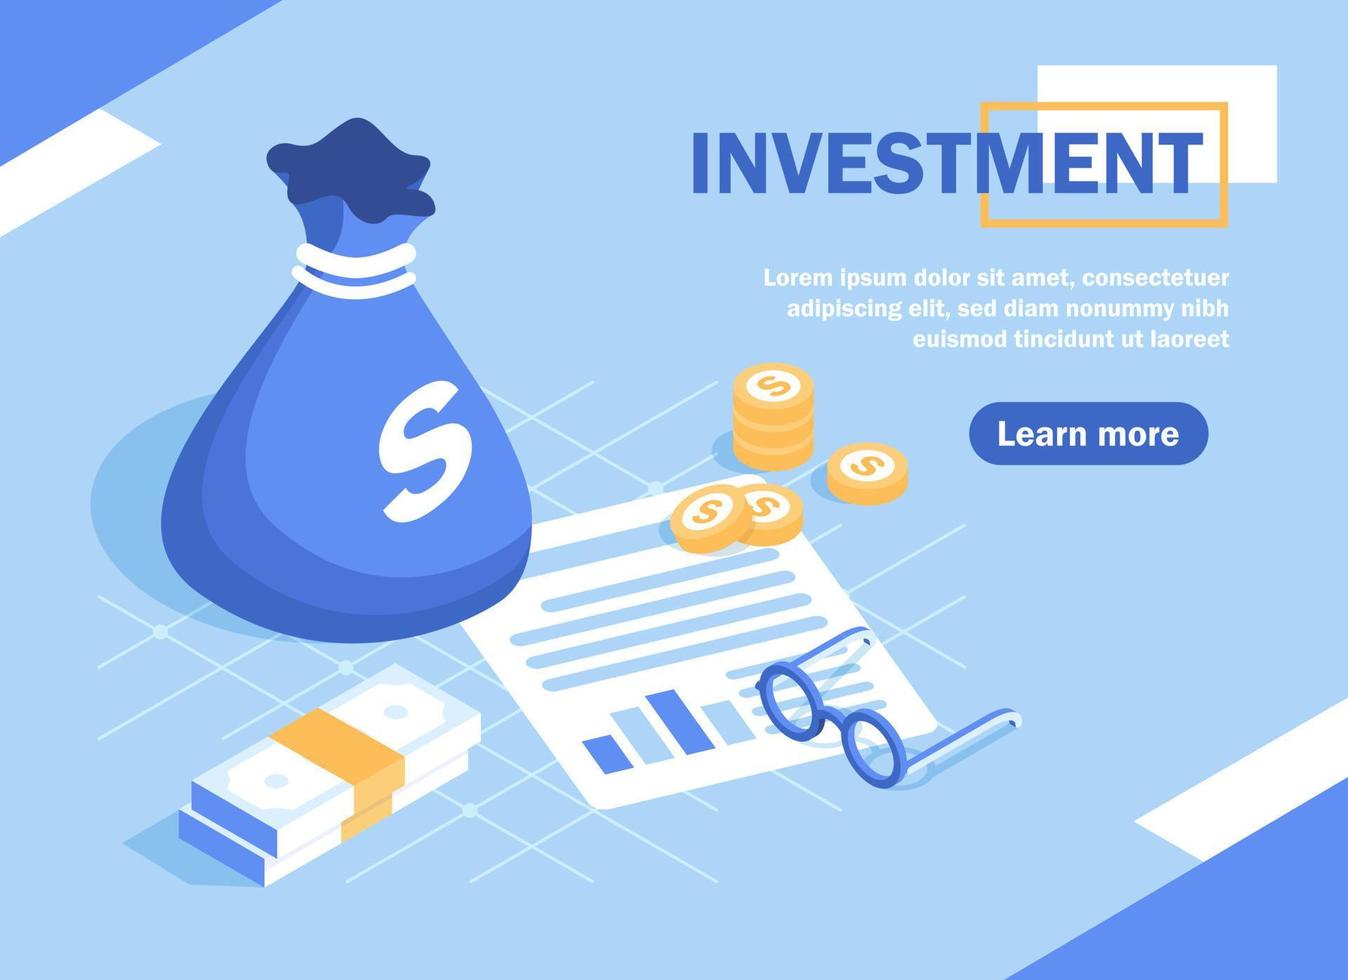 Investment analysis concept banner,Can use for web banner, infographics, hero images,flat design icon vector illustration